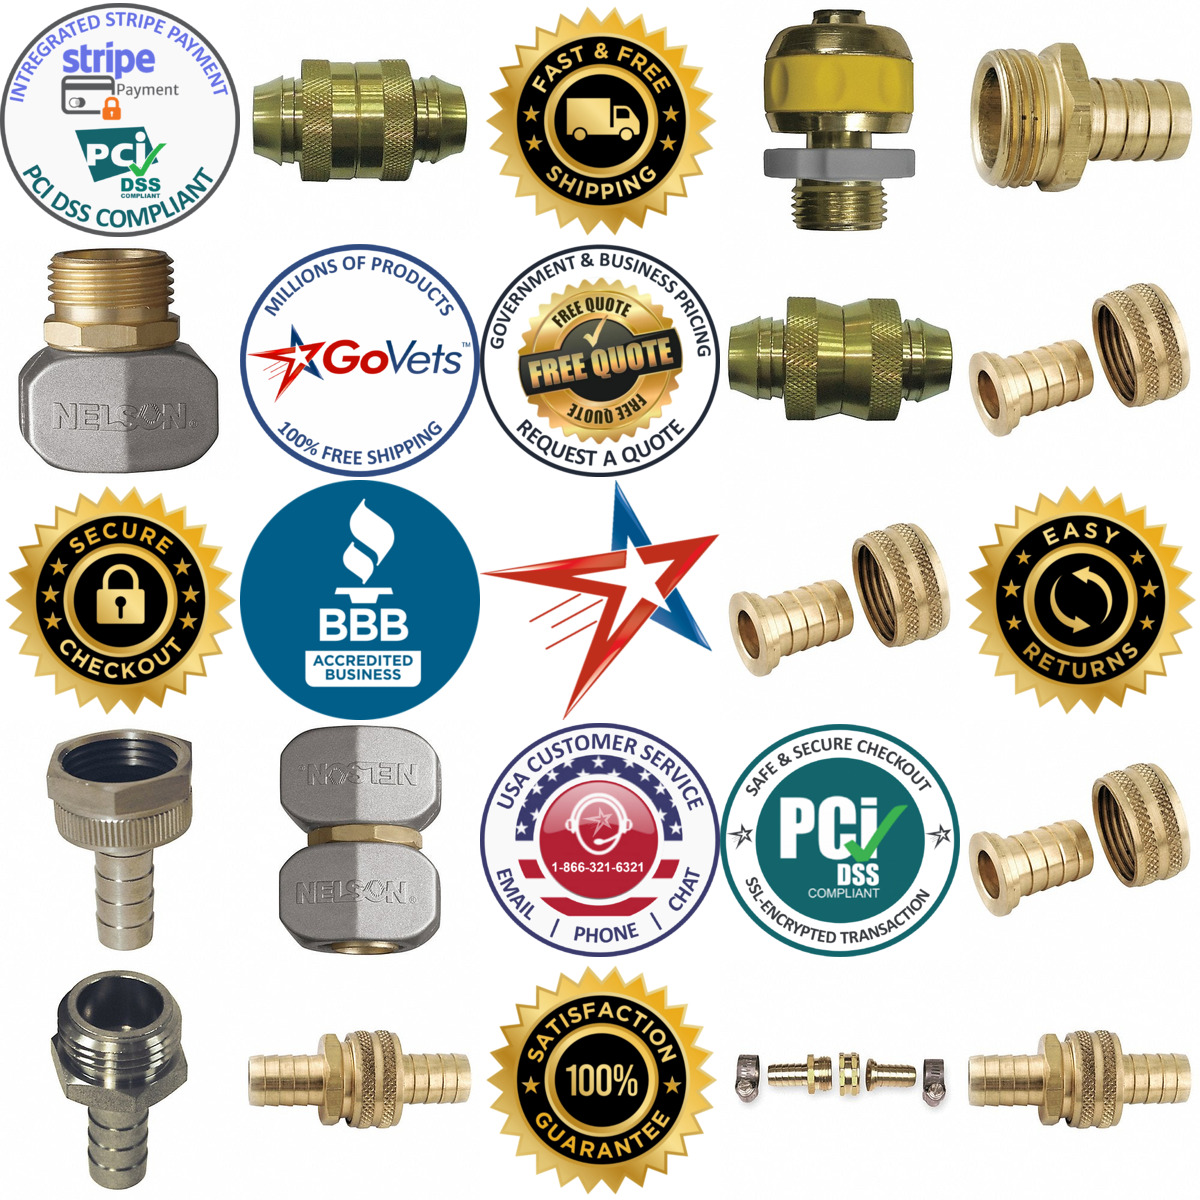 A selection of Garden Hose Repair Fittings products on GoVets